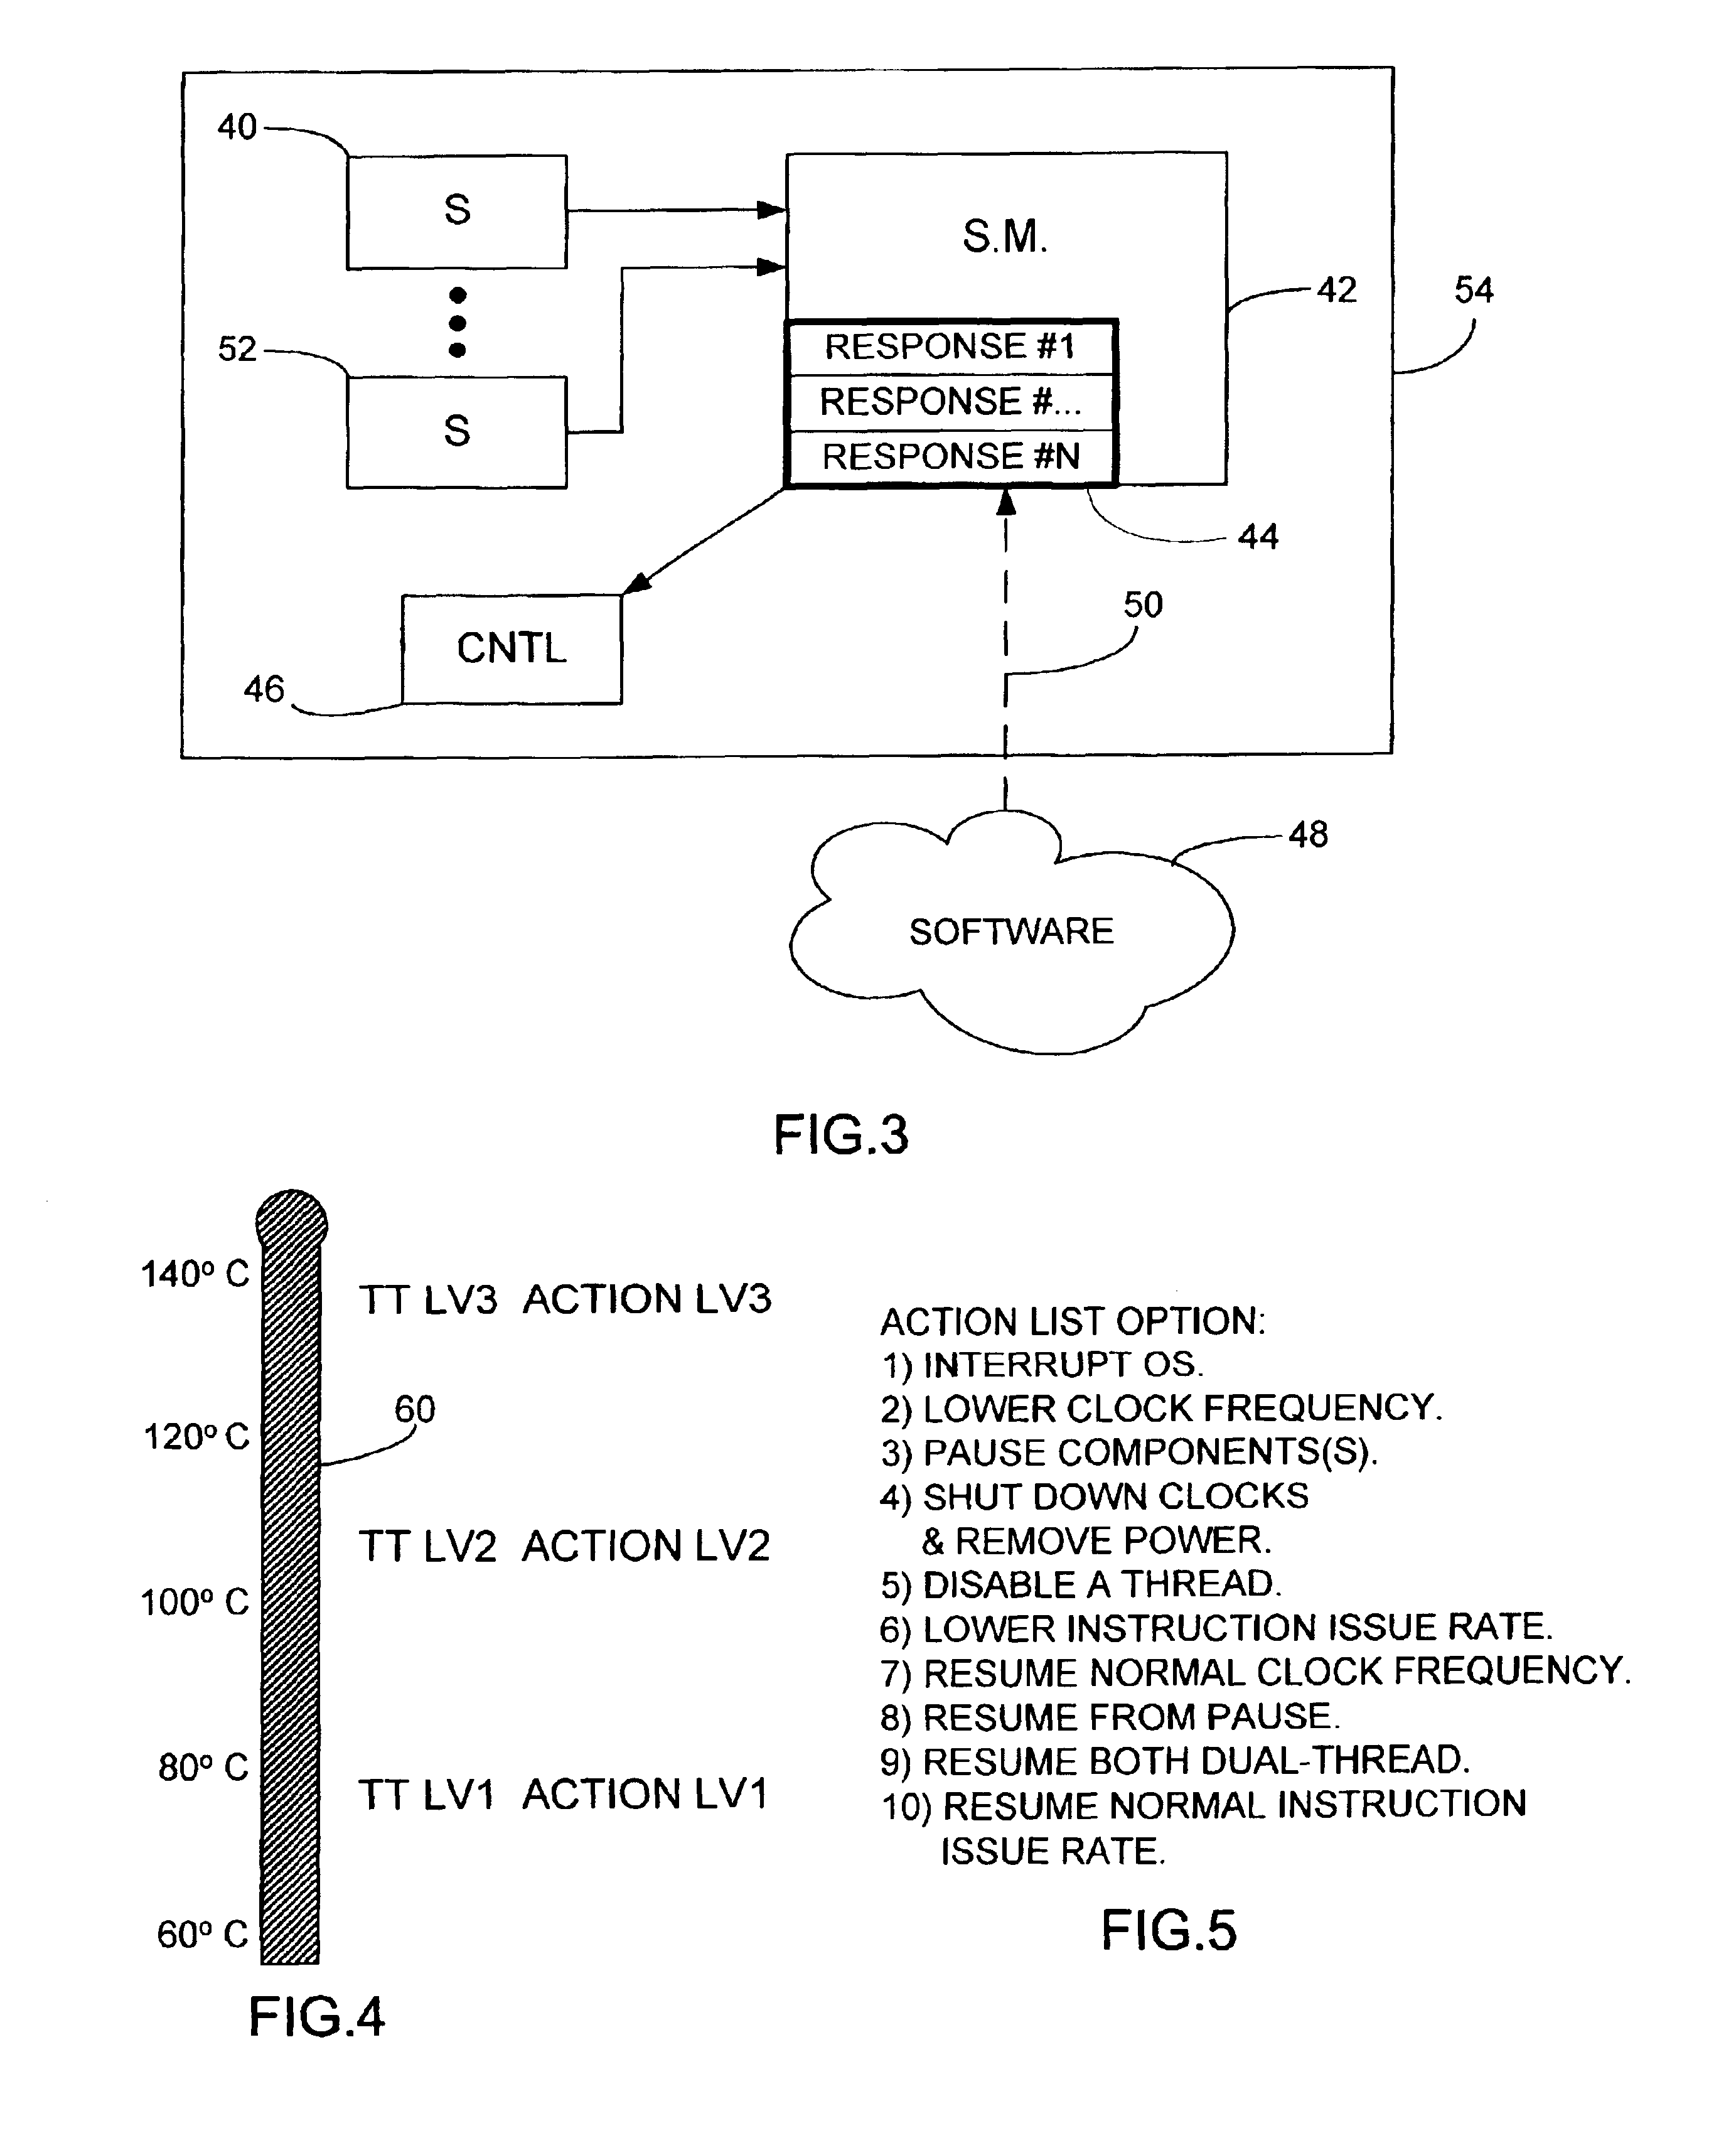 Computer chip heat responsive method and apparatus